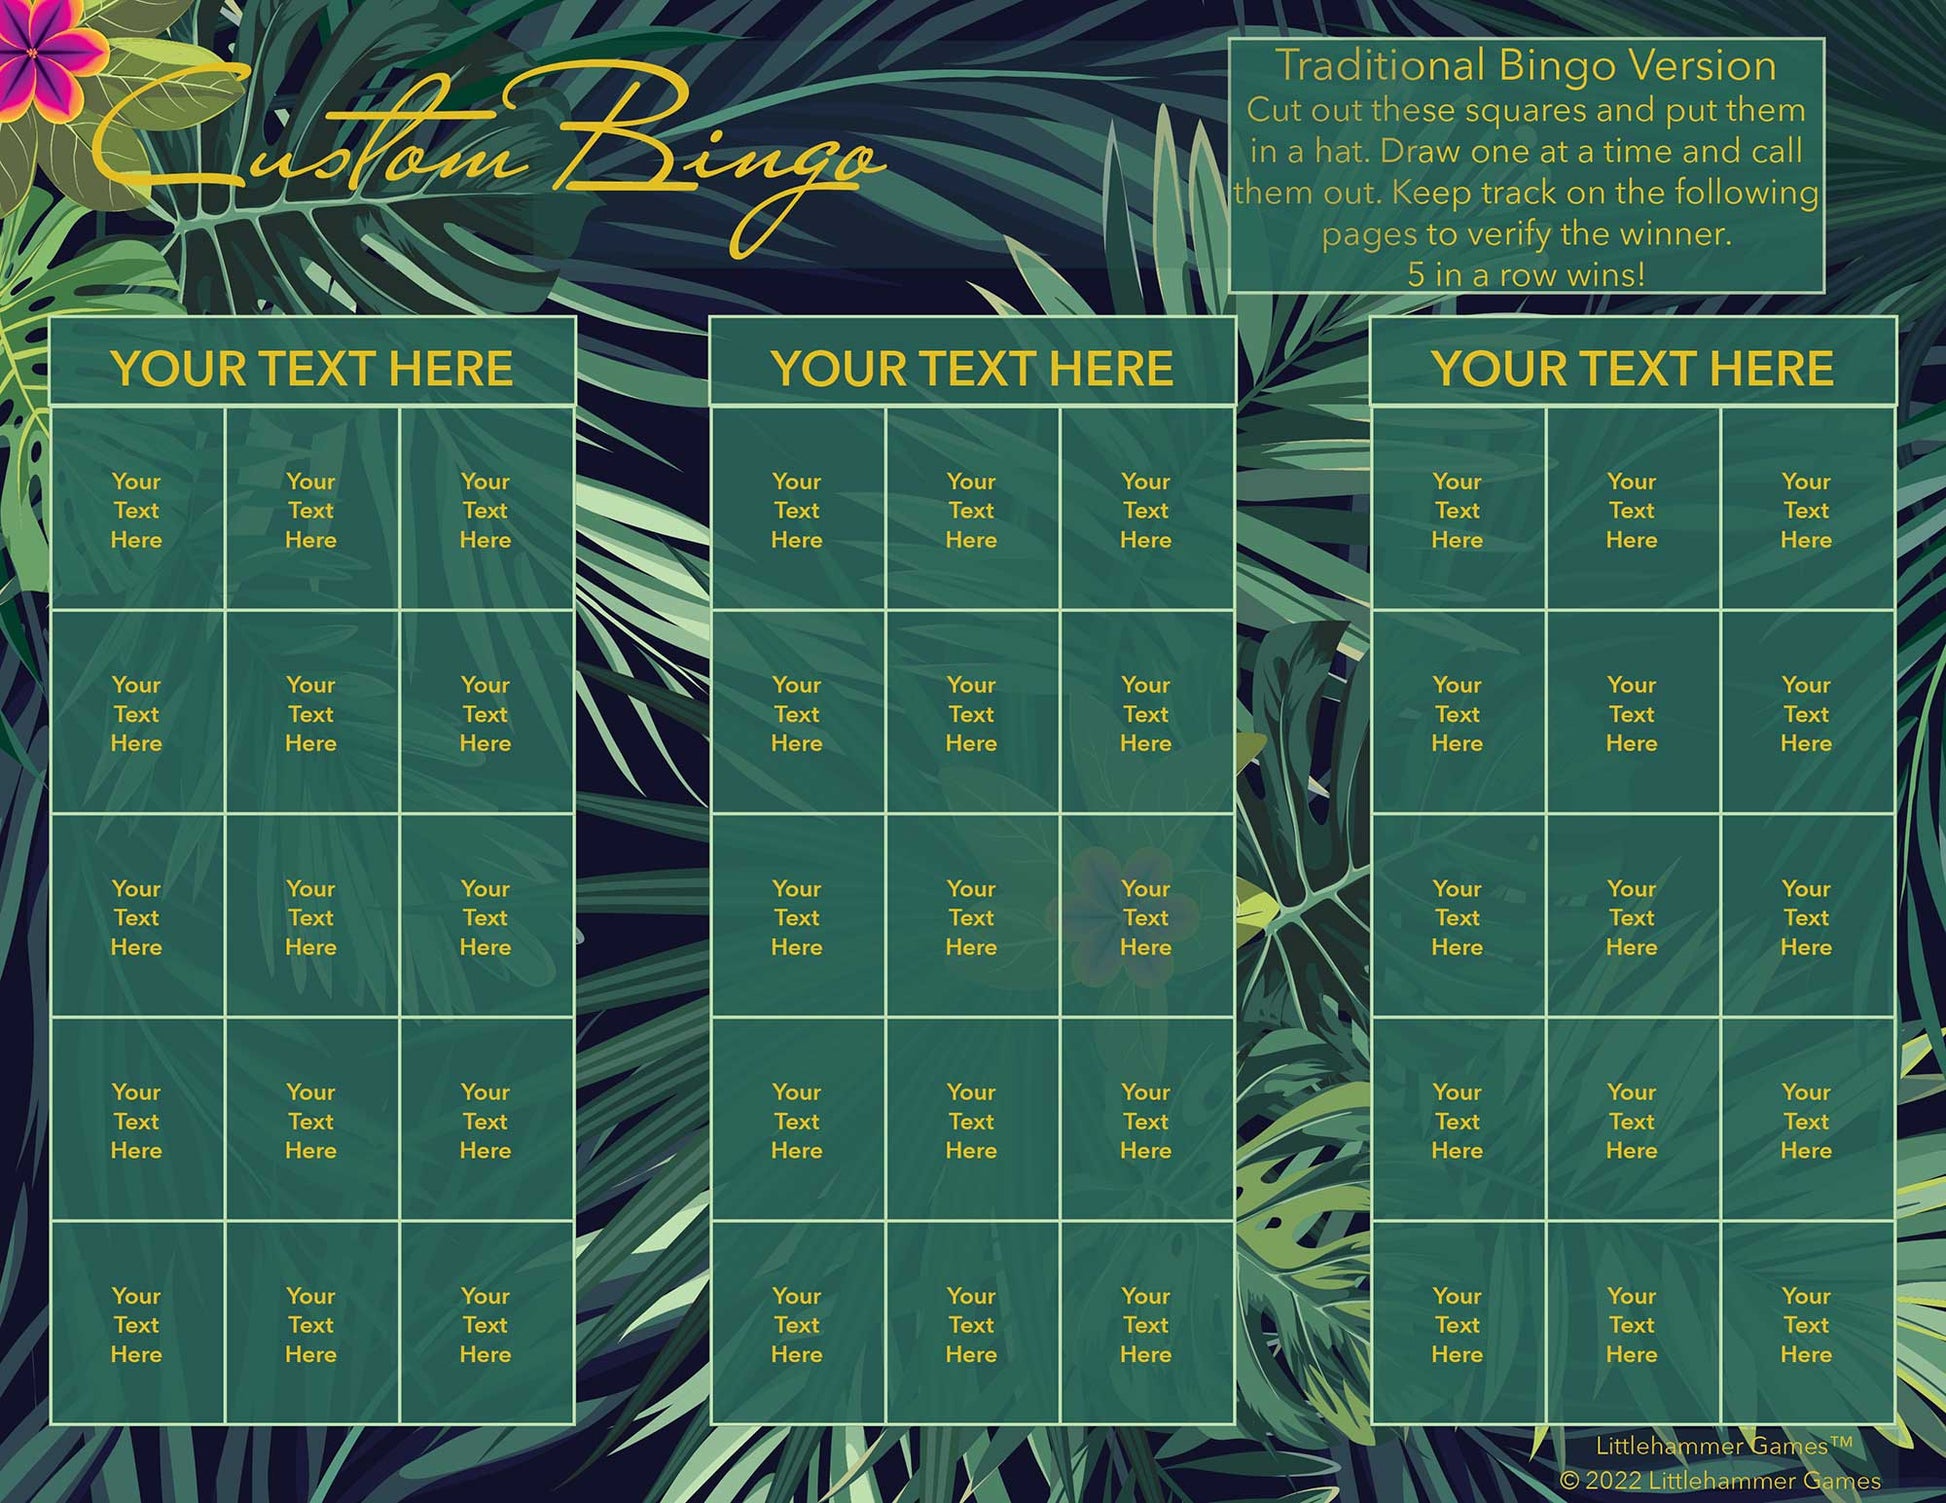 Custom Bingo calling card with gold text on a tropical leaves background